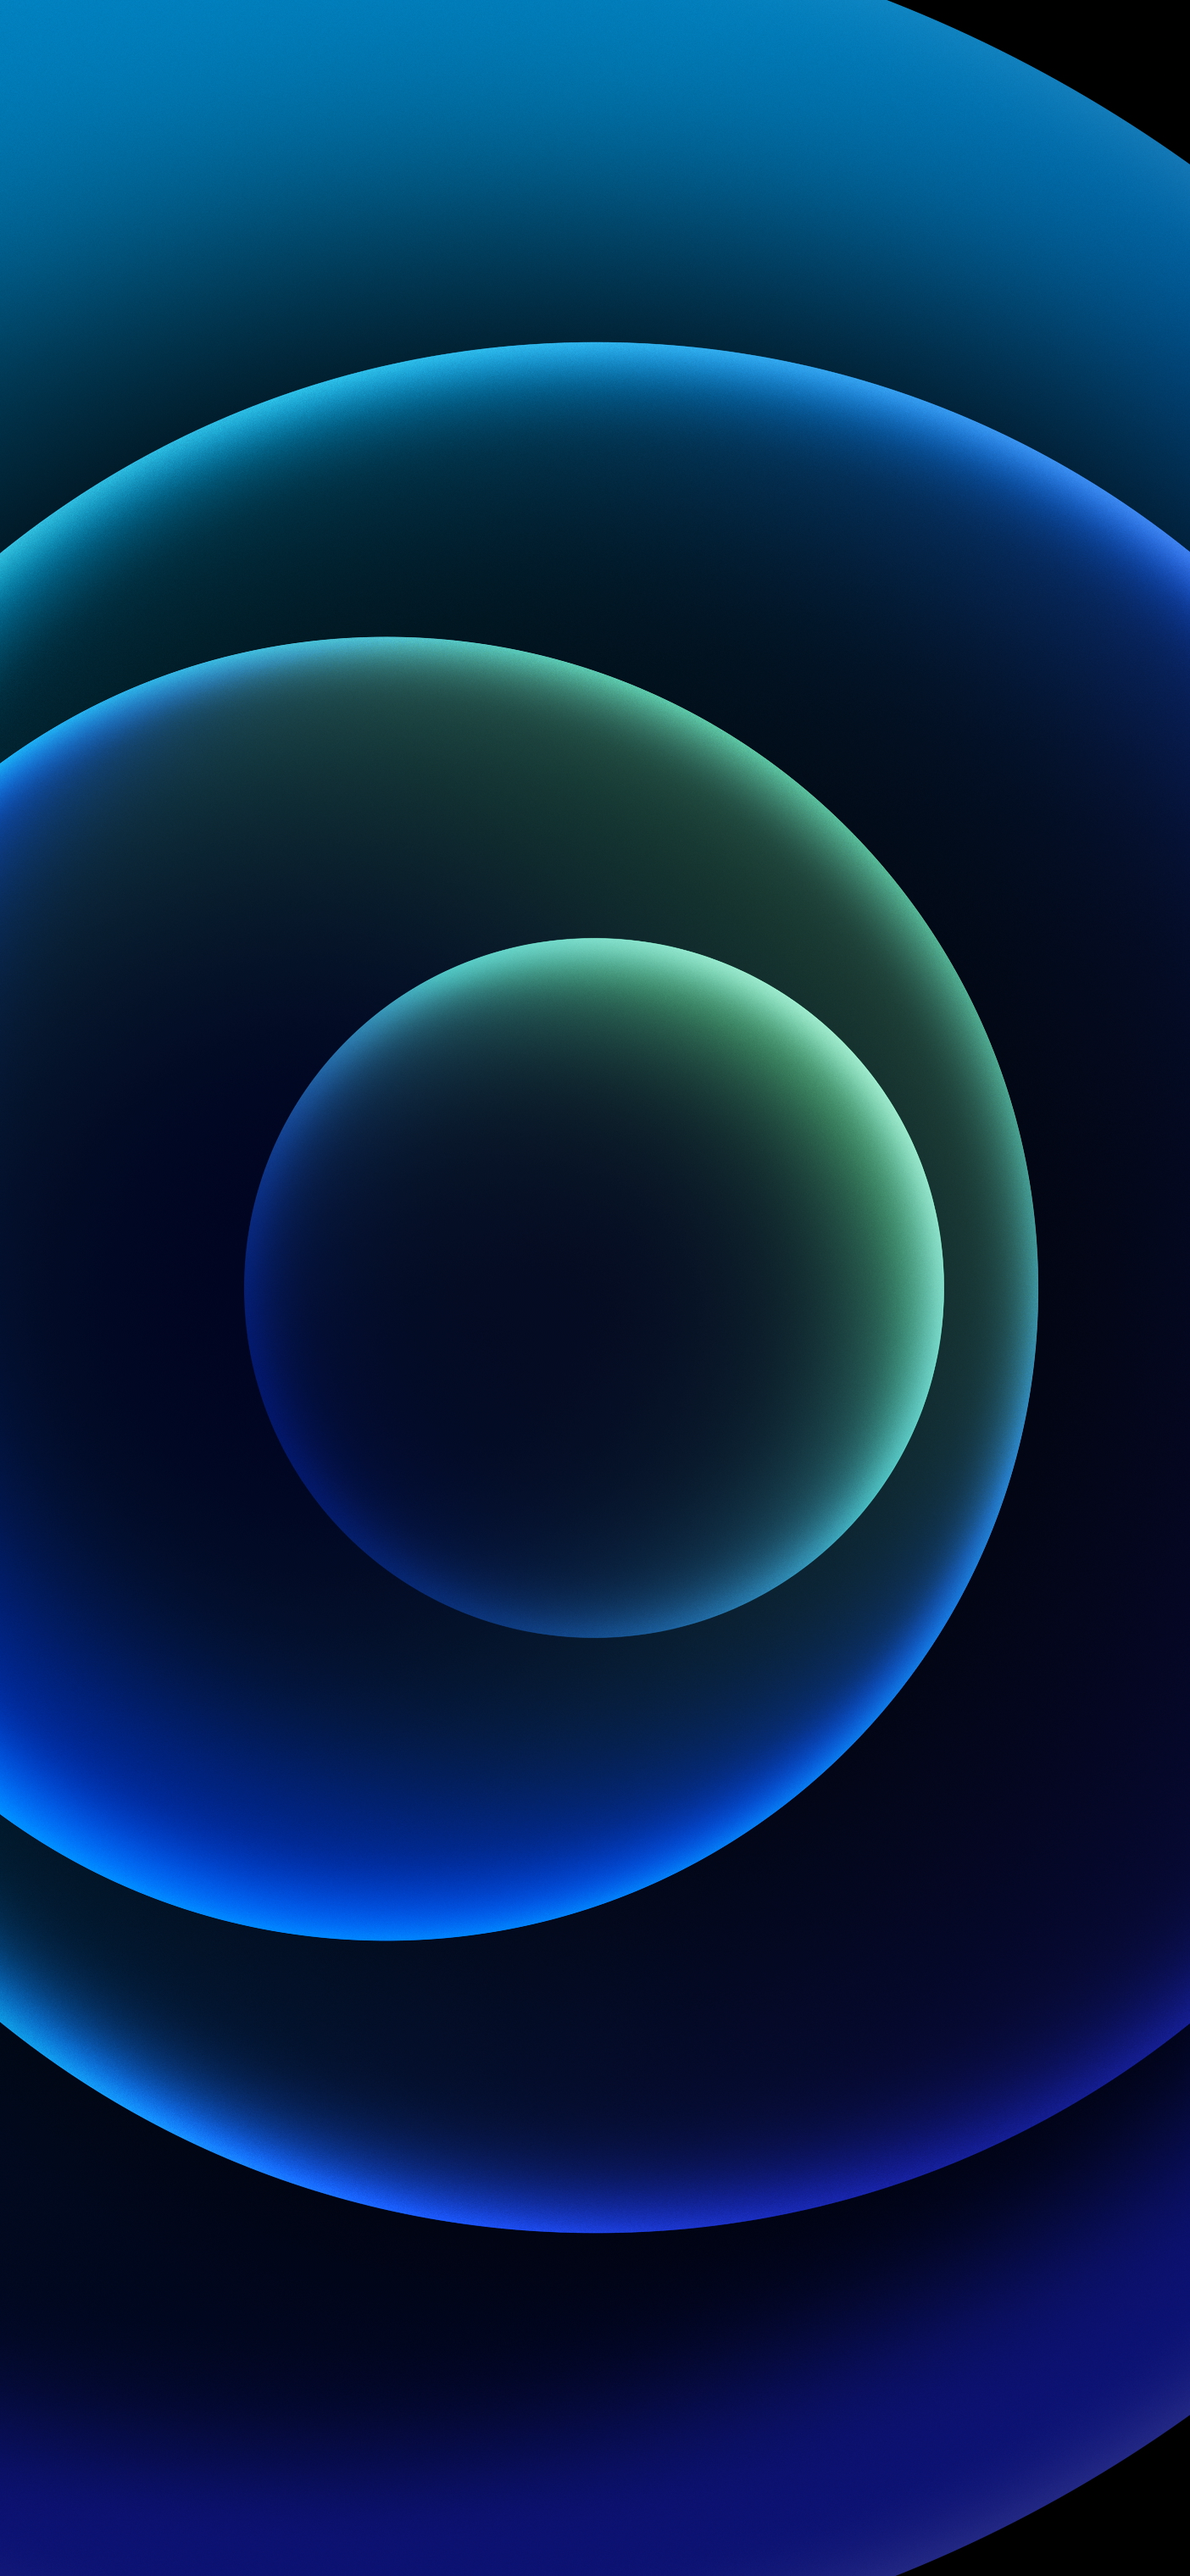 iPhone 12 – Orbs Blue (Dark) | LIVE Wallpaper - Wallpapers Central